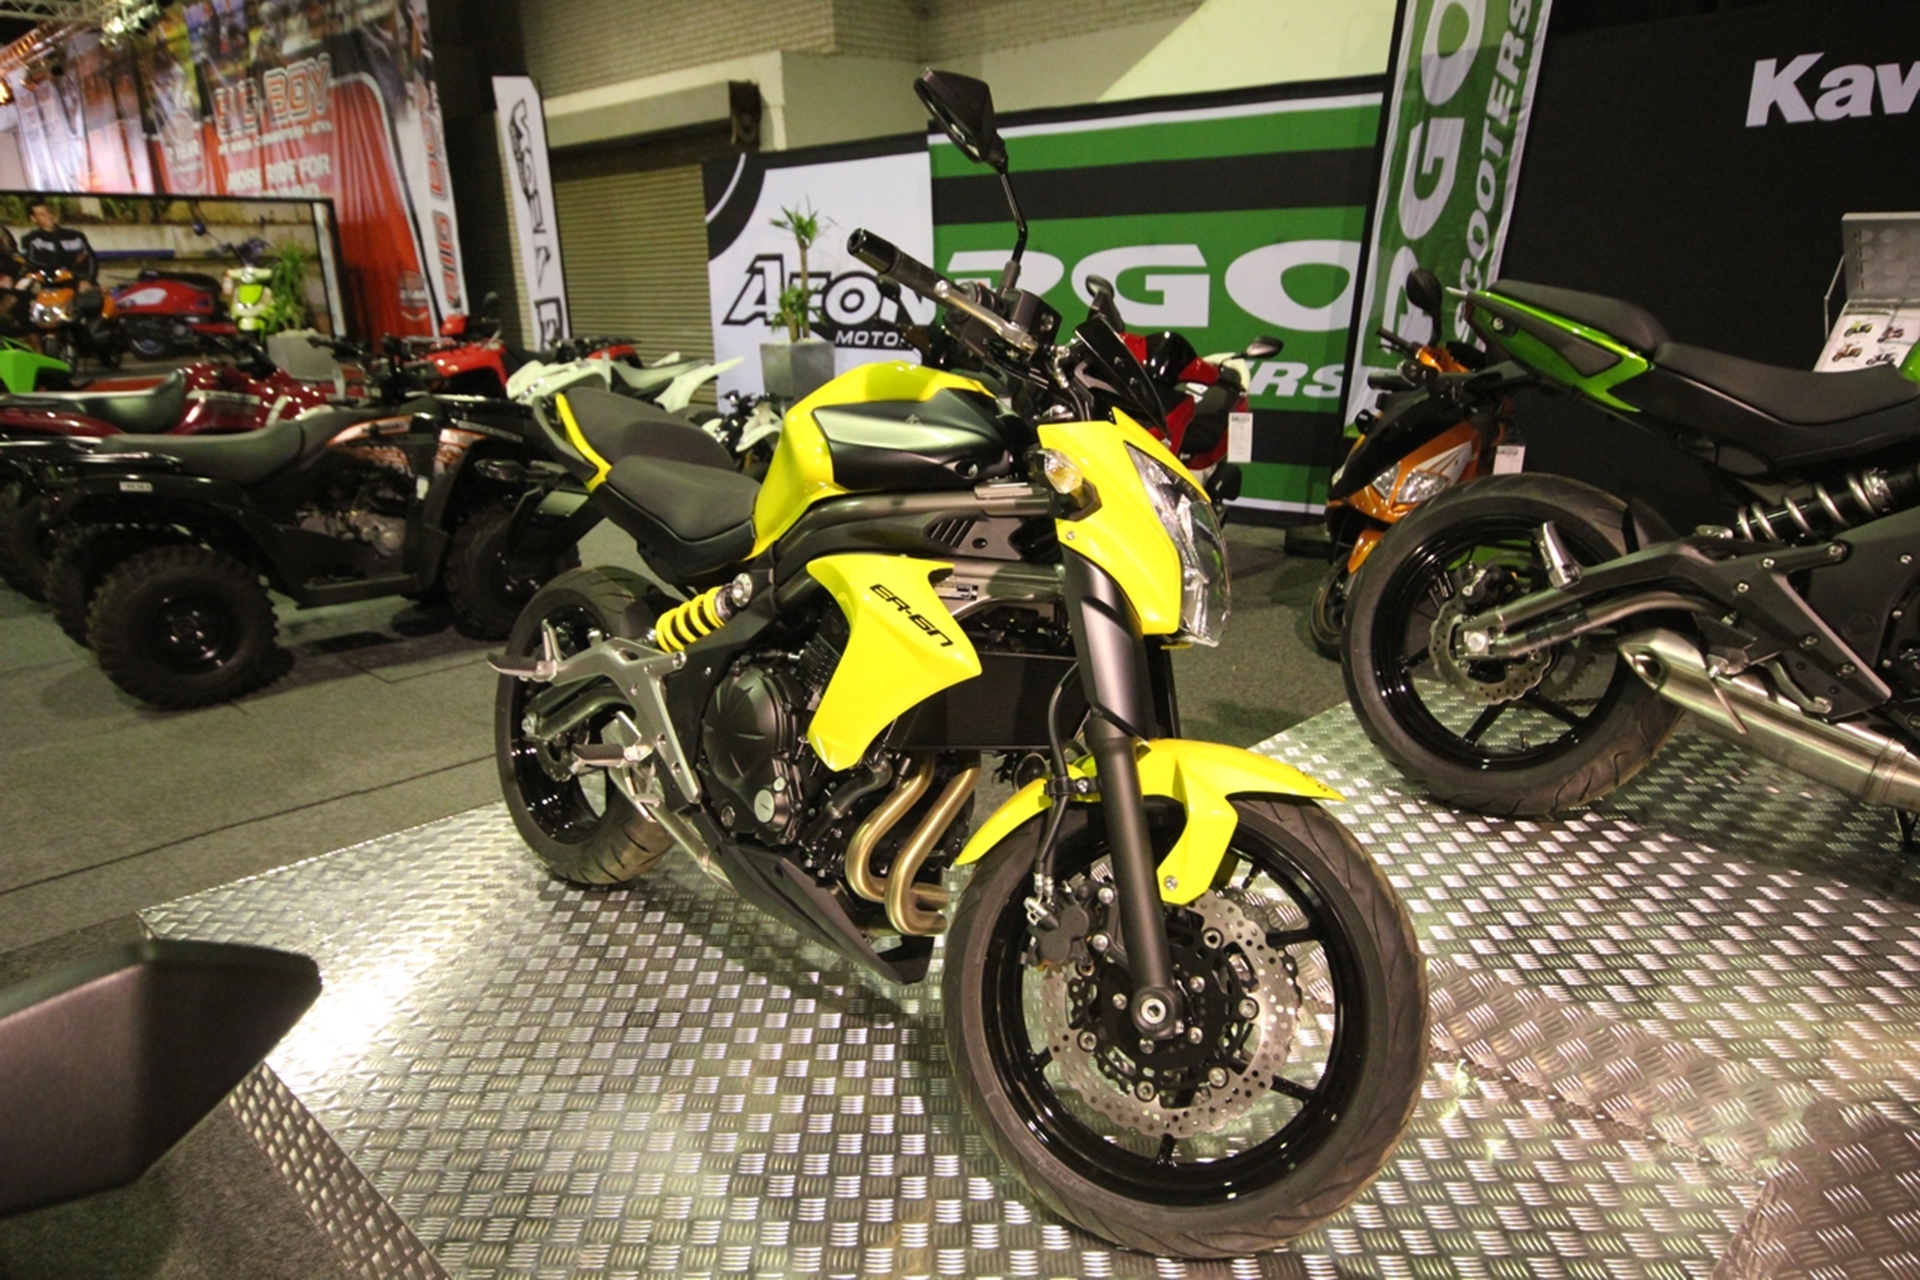 Photographs from the Amid Johannesburg Motorcycle Show